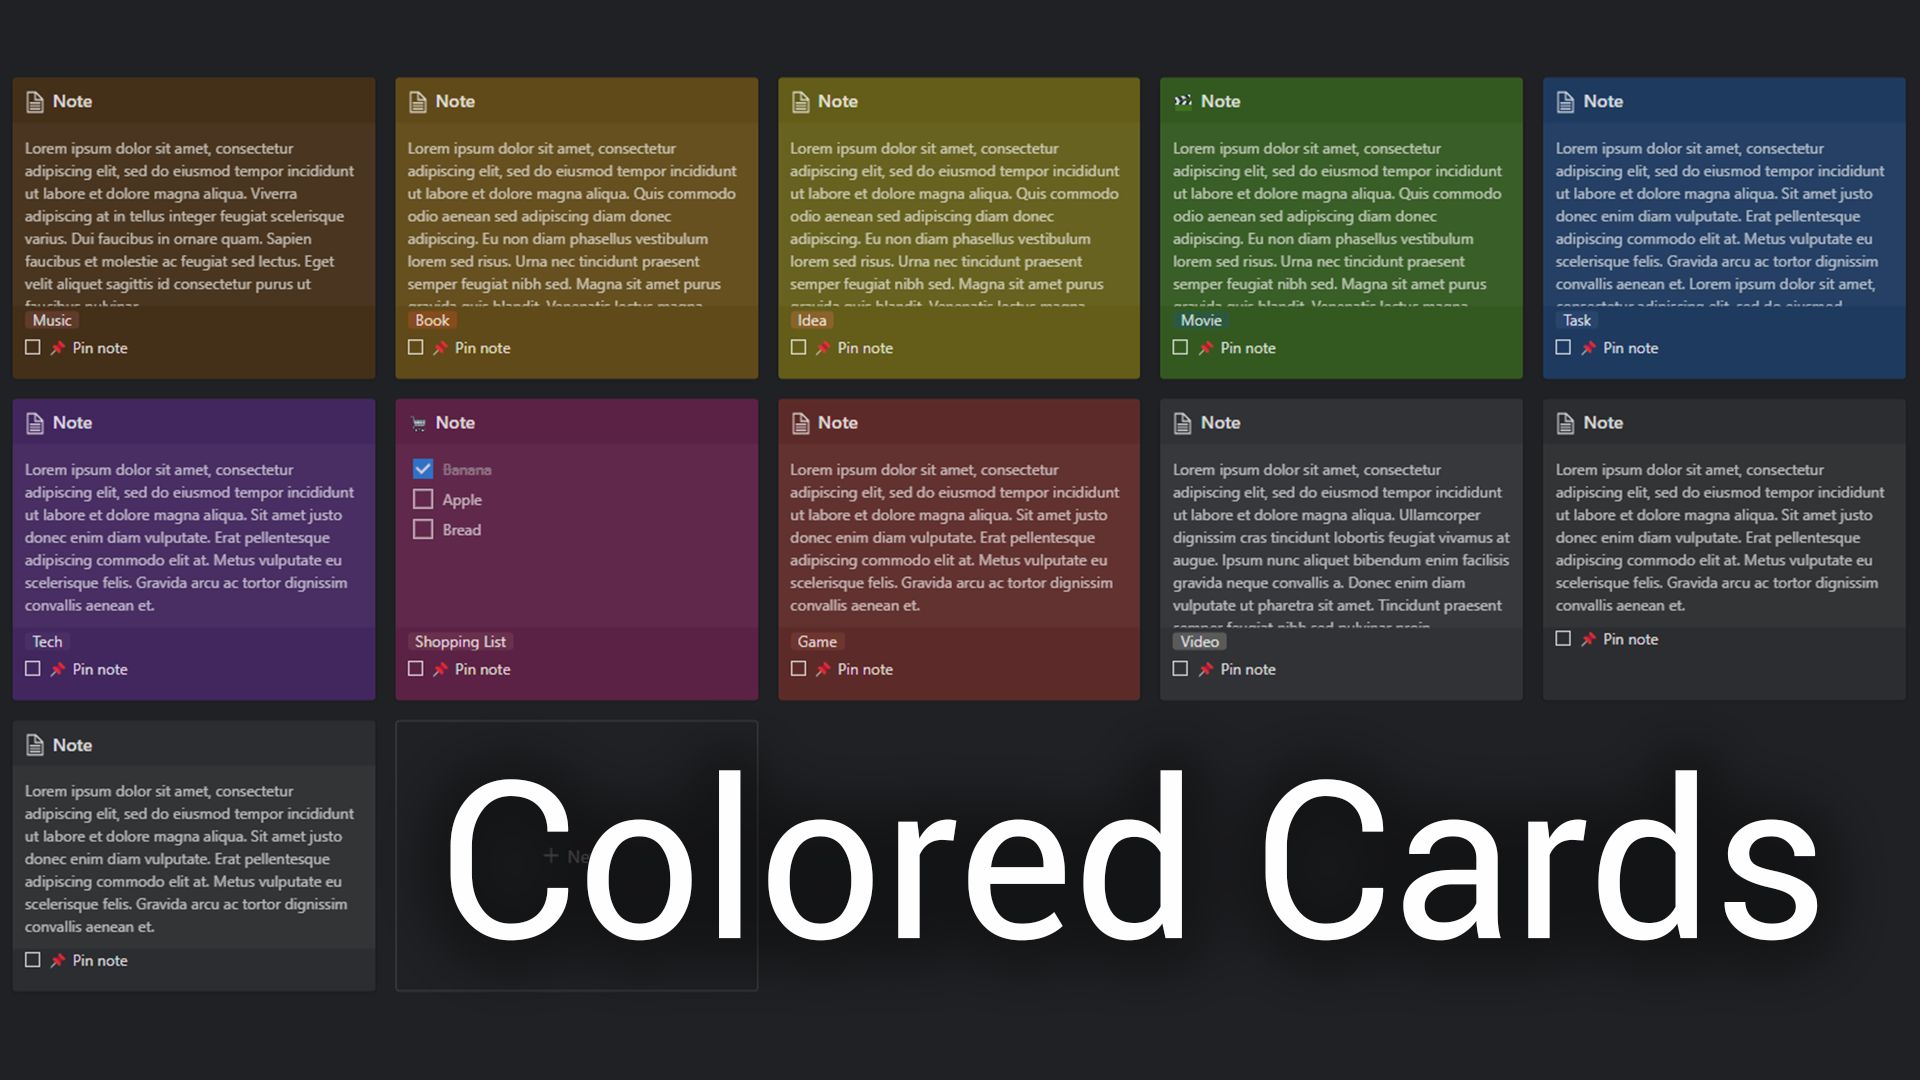 Screenshot of Colored Cards in the Gallery view - notion.so